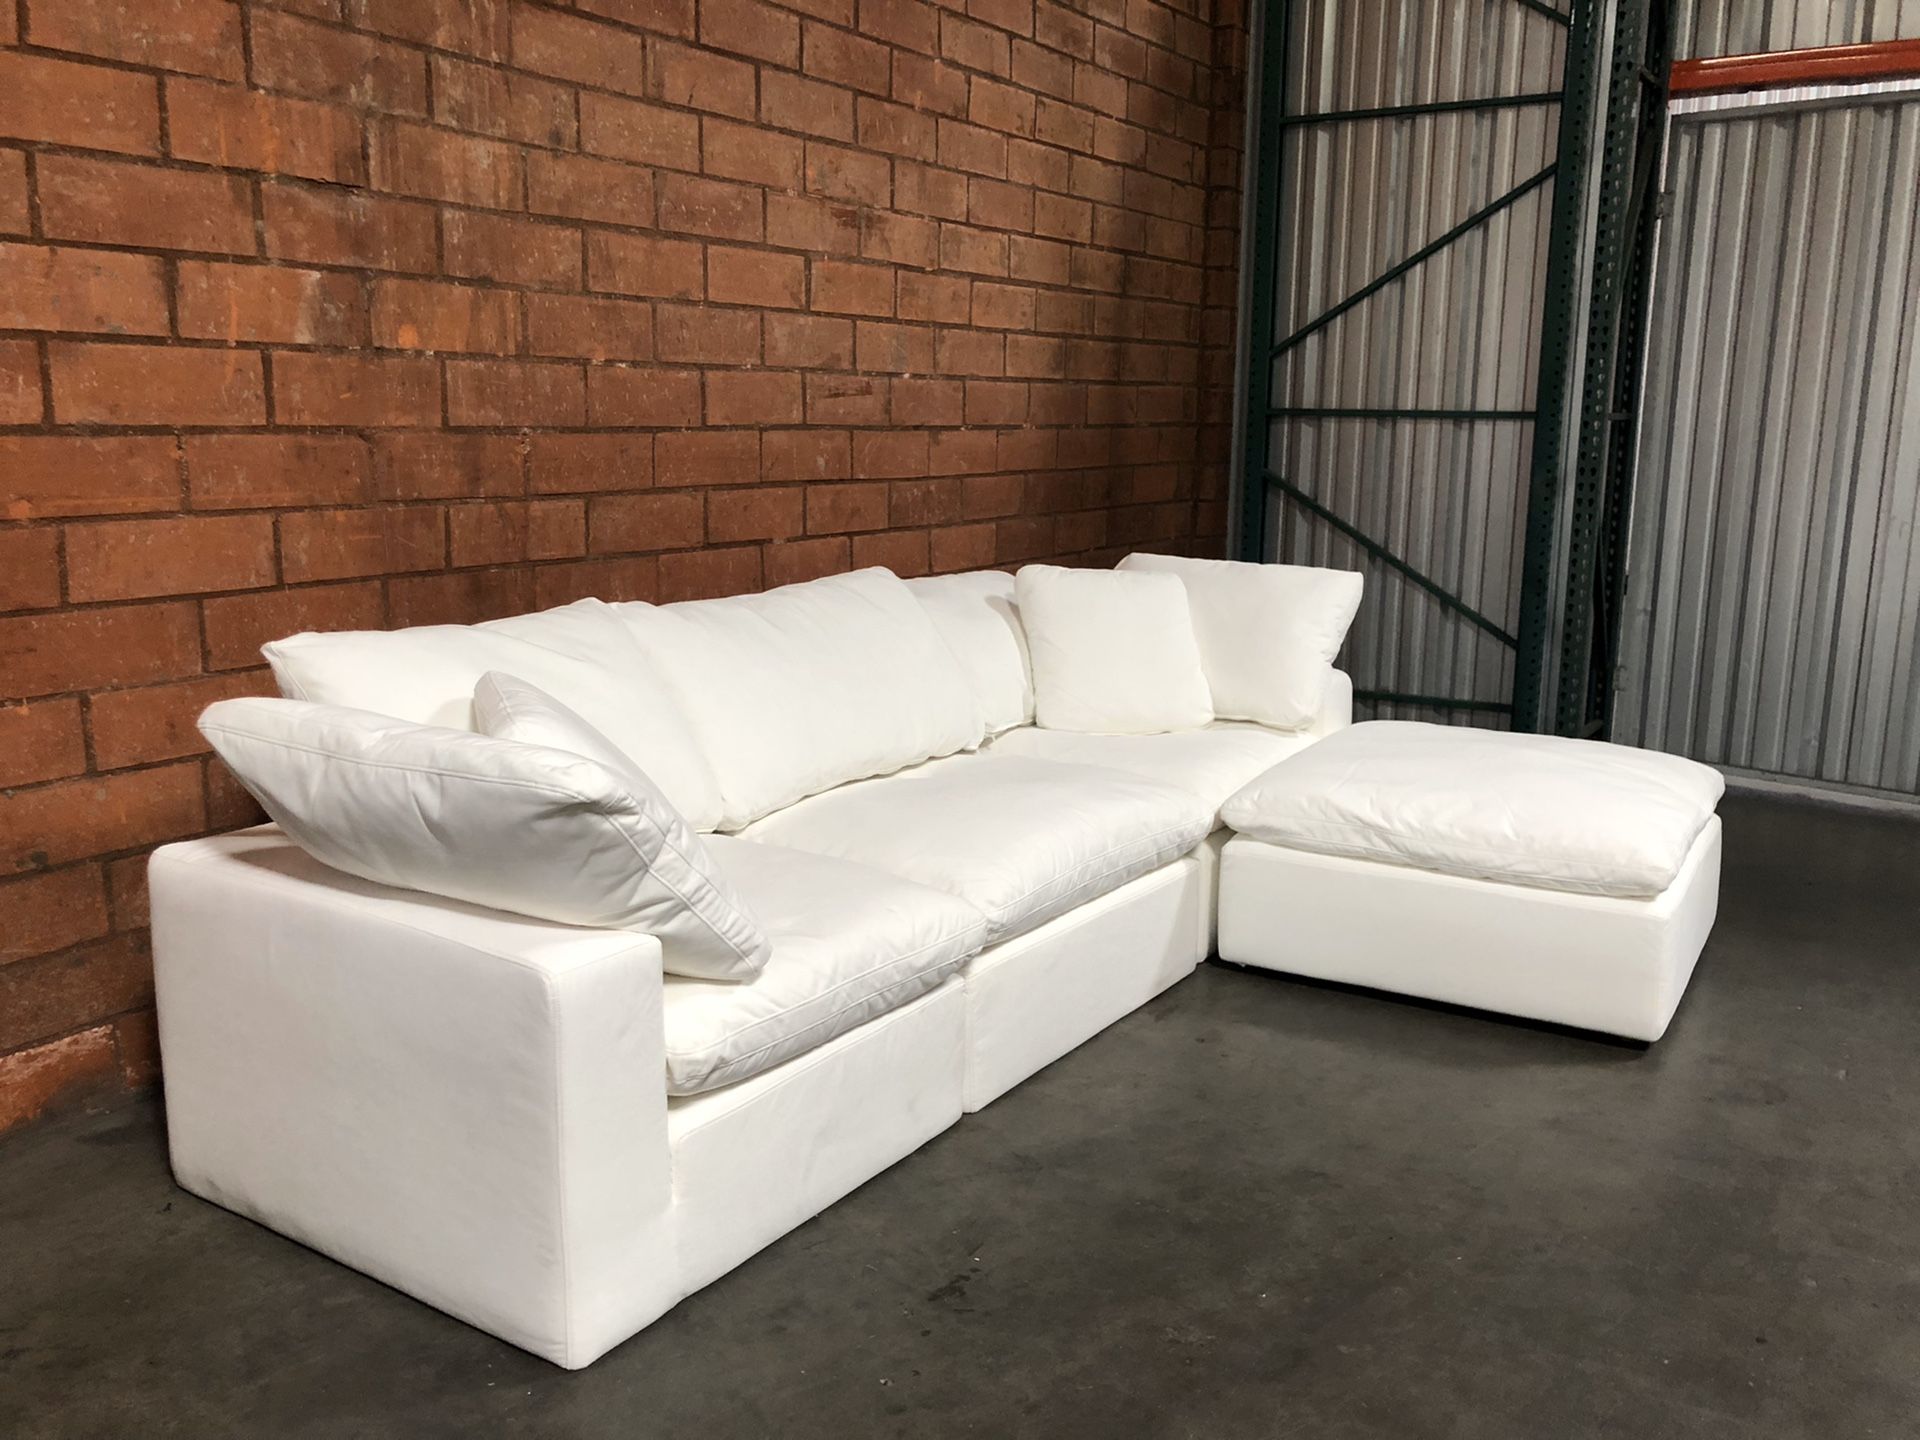 100% STAIN RESISTANT CLOUD ► Modular Sectional Sofa Couch ► $3,900 REG $12,000 PRICE FINAL - Restoration Hardware RH